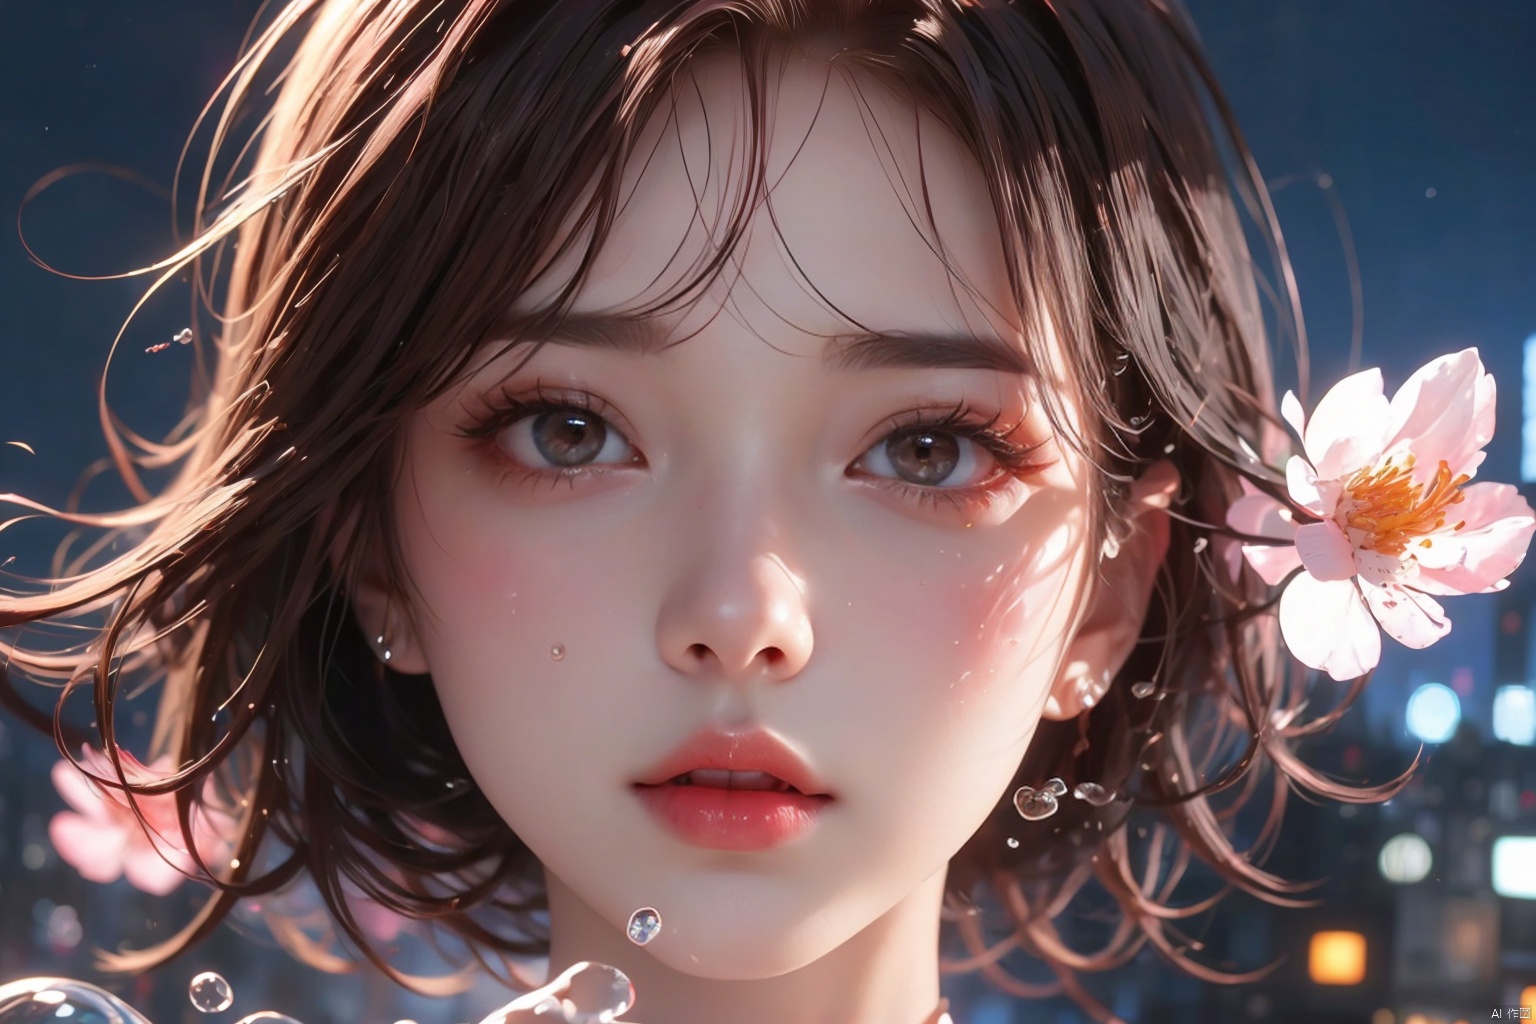  KK-Comic Style,looking at viewer,bangs,lips,makeup,on bed,red lips,peach blossom eye,pink hair,crop_top,skirt,night_sky,rooftop,city,neon lights,highly detailed,ultra-high resolutions,32K UHD,best quality,masterpiece,

1girl\((bishoujo), (lovely face:1.6), (reddish black hair:1.6), (browneyes:1.6), (small breast:1.8), (straight_hair:1.4), (short_hair:1.4), plump_*****, (hairless:1.2), long_legs, sharp_eyelid, black eyeliner, black eyelashes, reddish eyeshadow, (perfect detailed face), (pink lipgloss:1.3), (perfect hands)\),
(cry:1.4), (grimace:1.4),from side,
water drop,water, partiallysubmerged,flower,airbubble